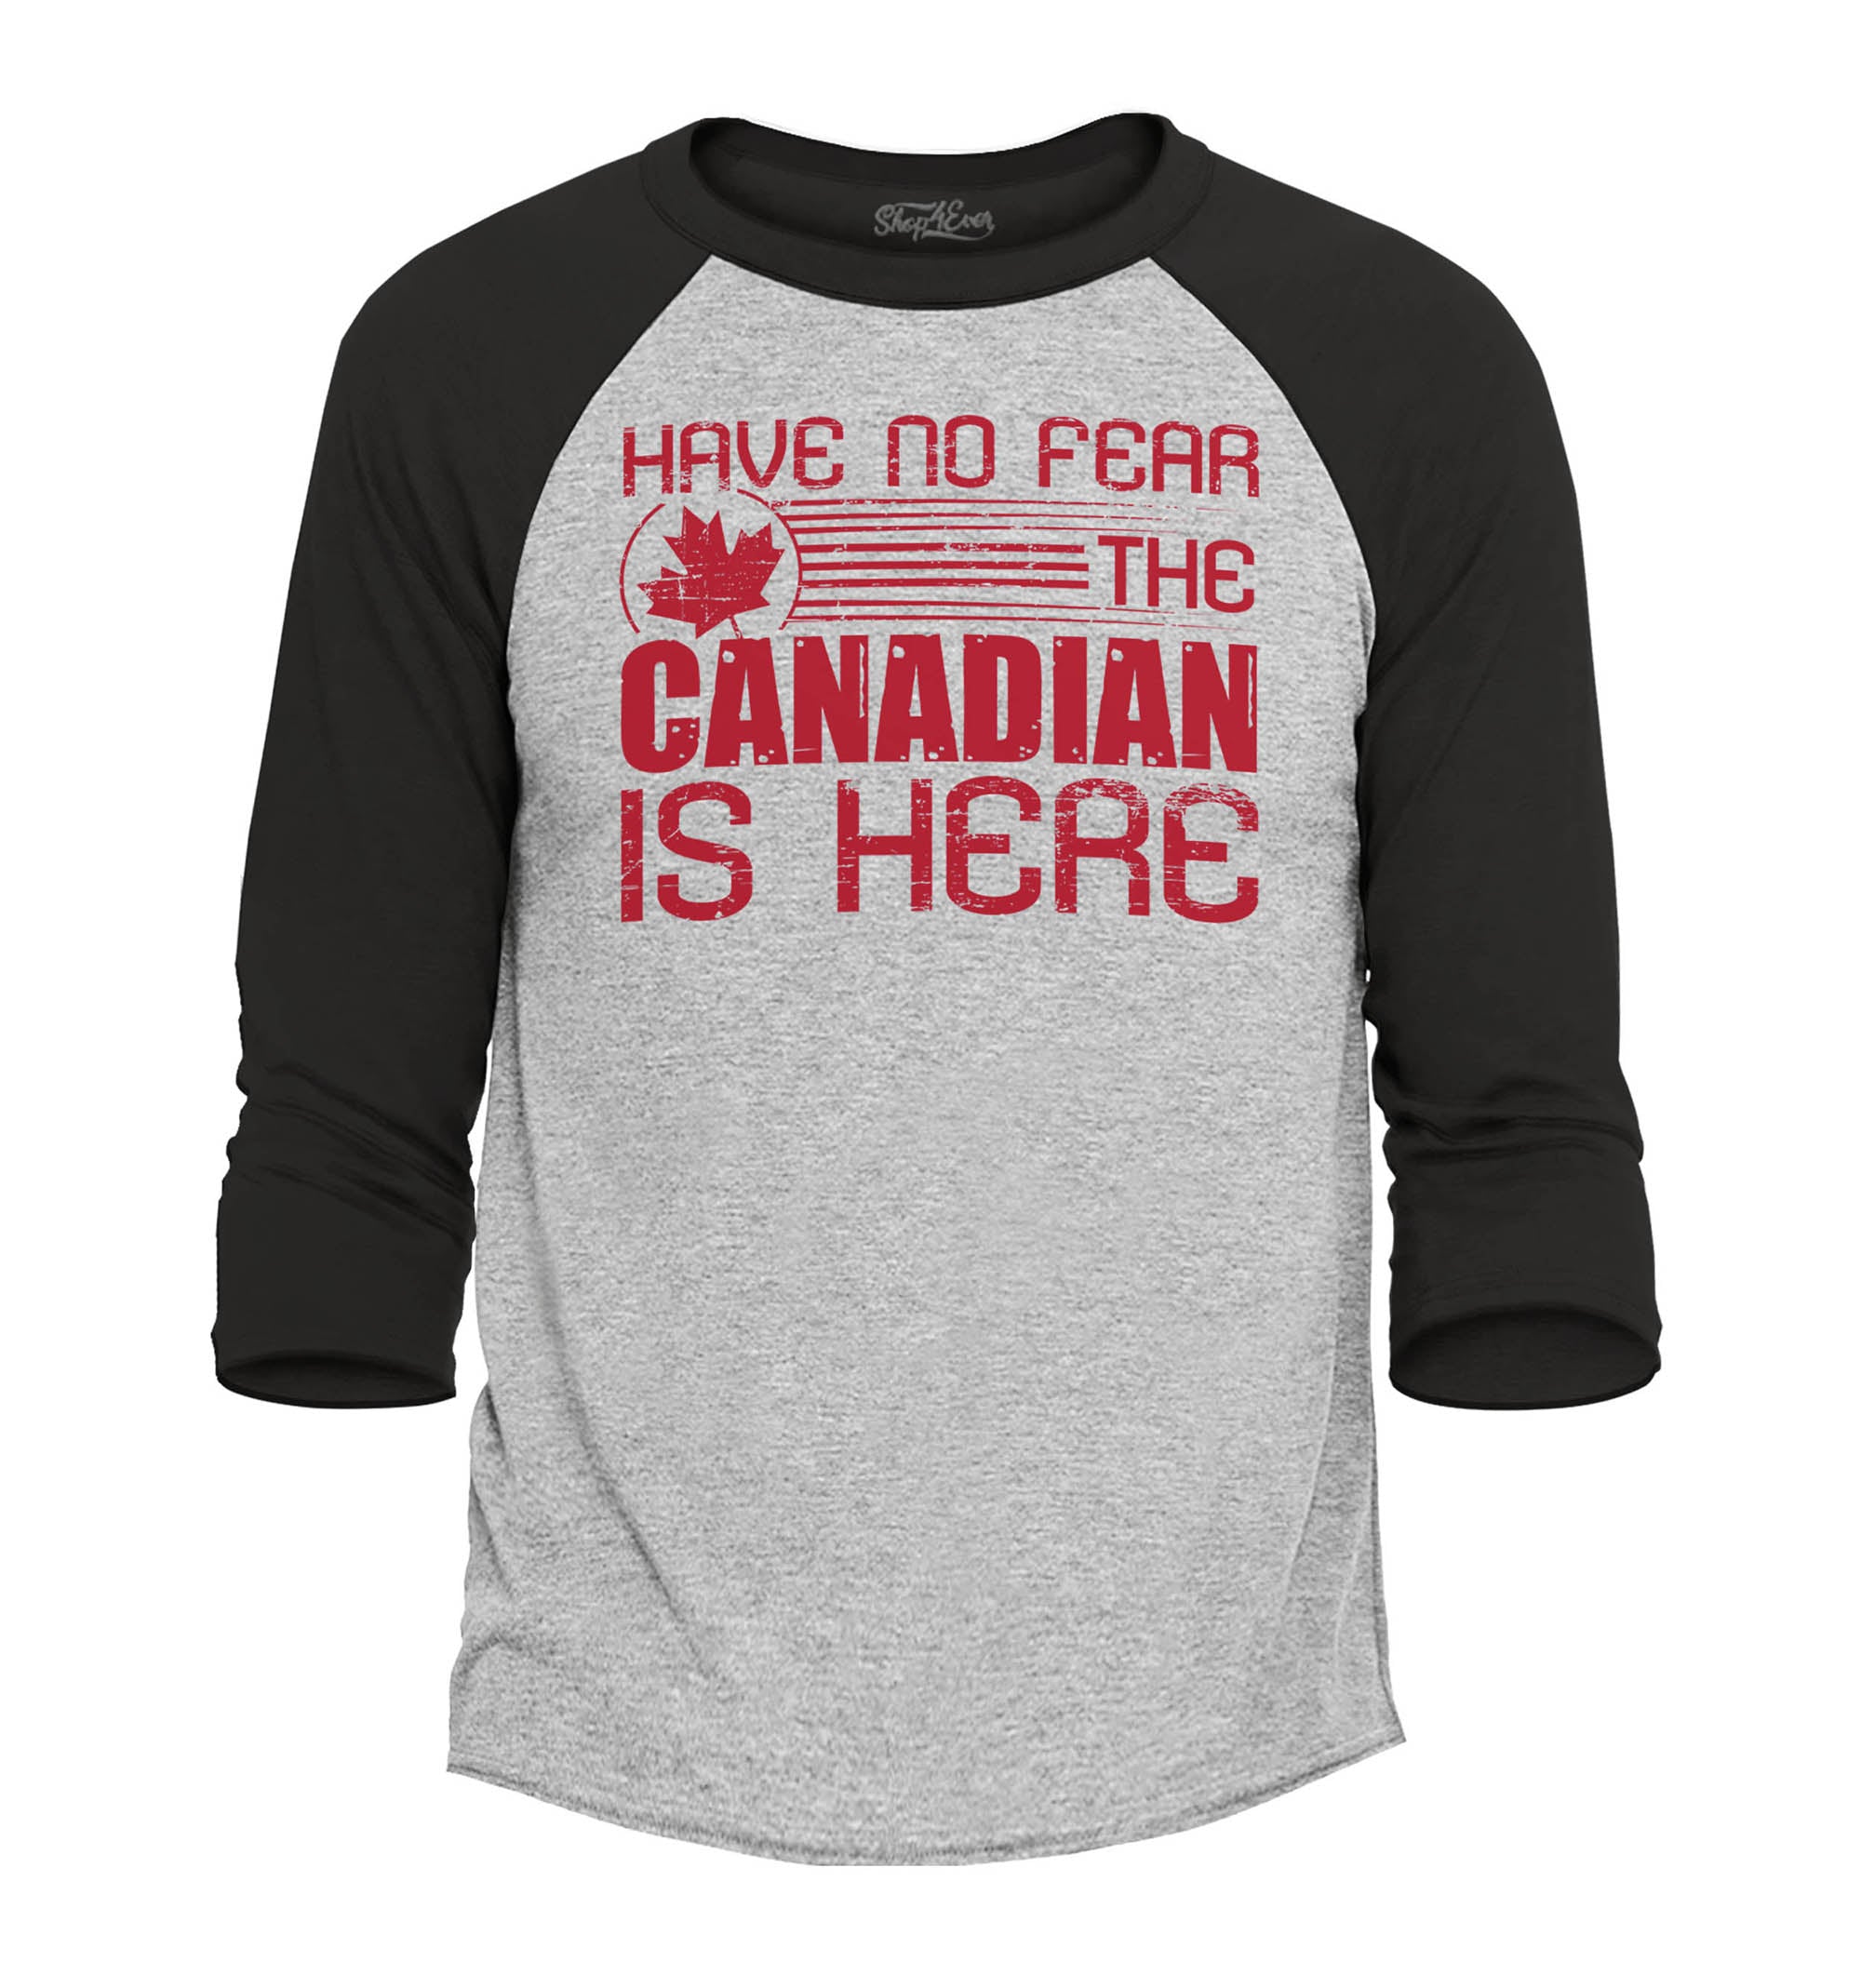 Have No Fear The Canadian is Here Canada Pride Raglan Baseball Shirt